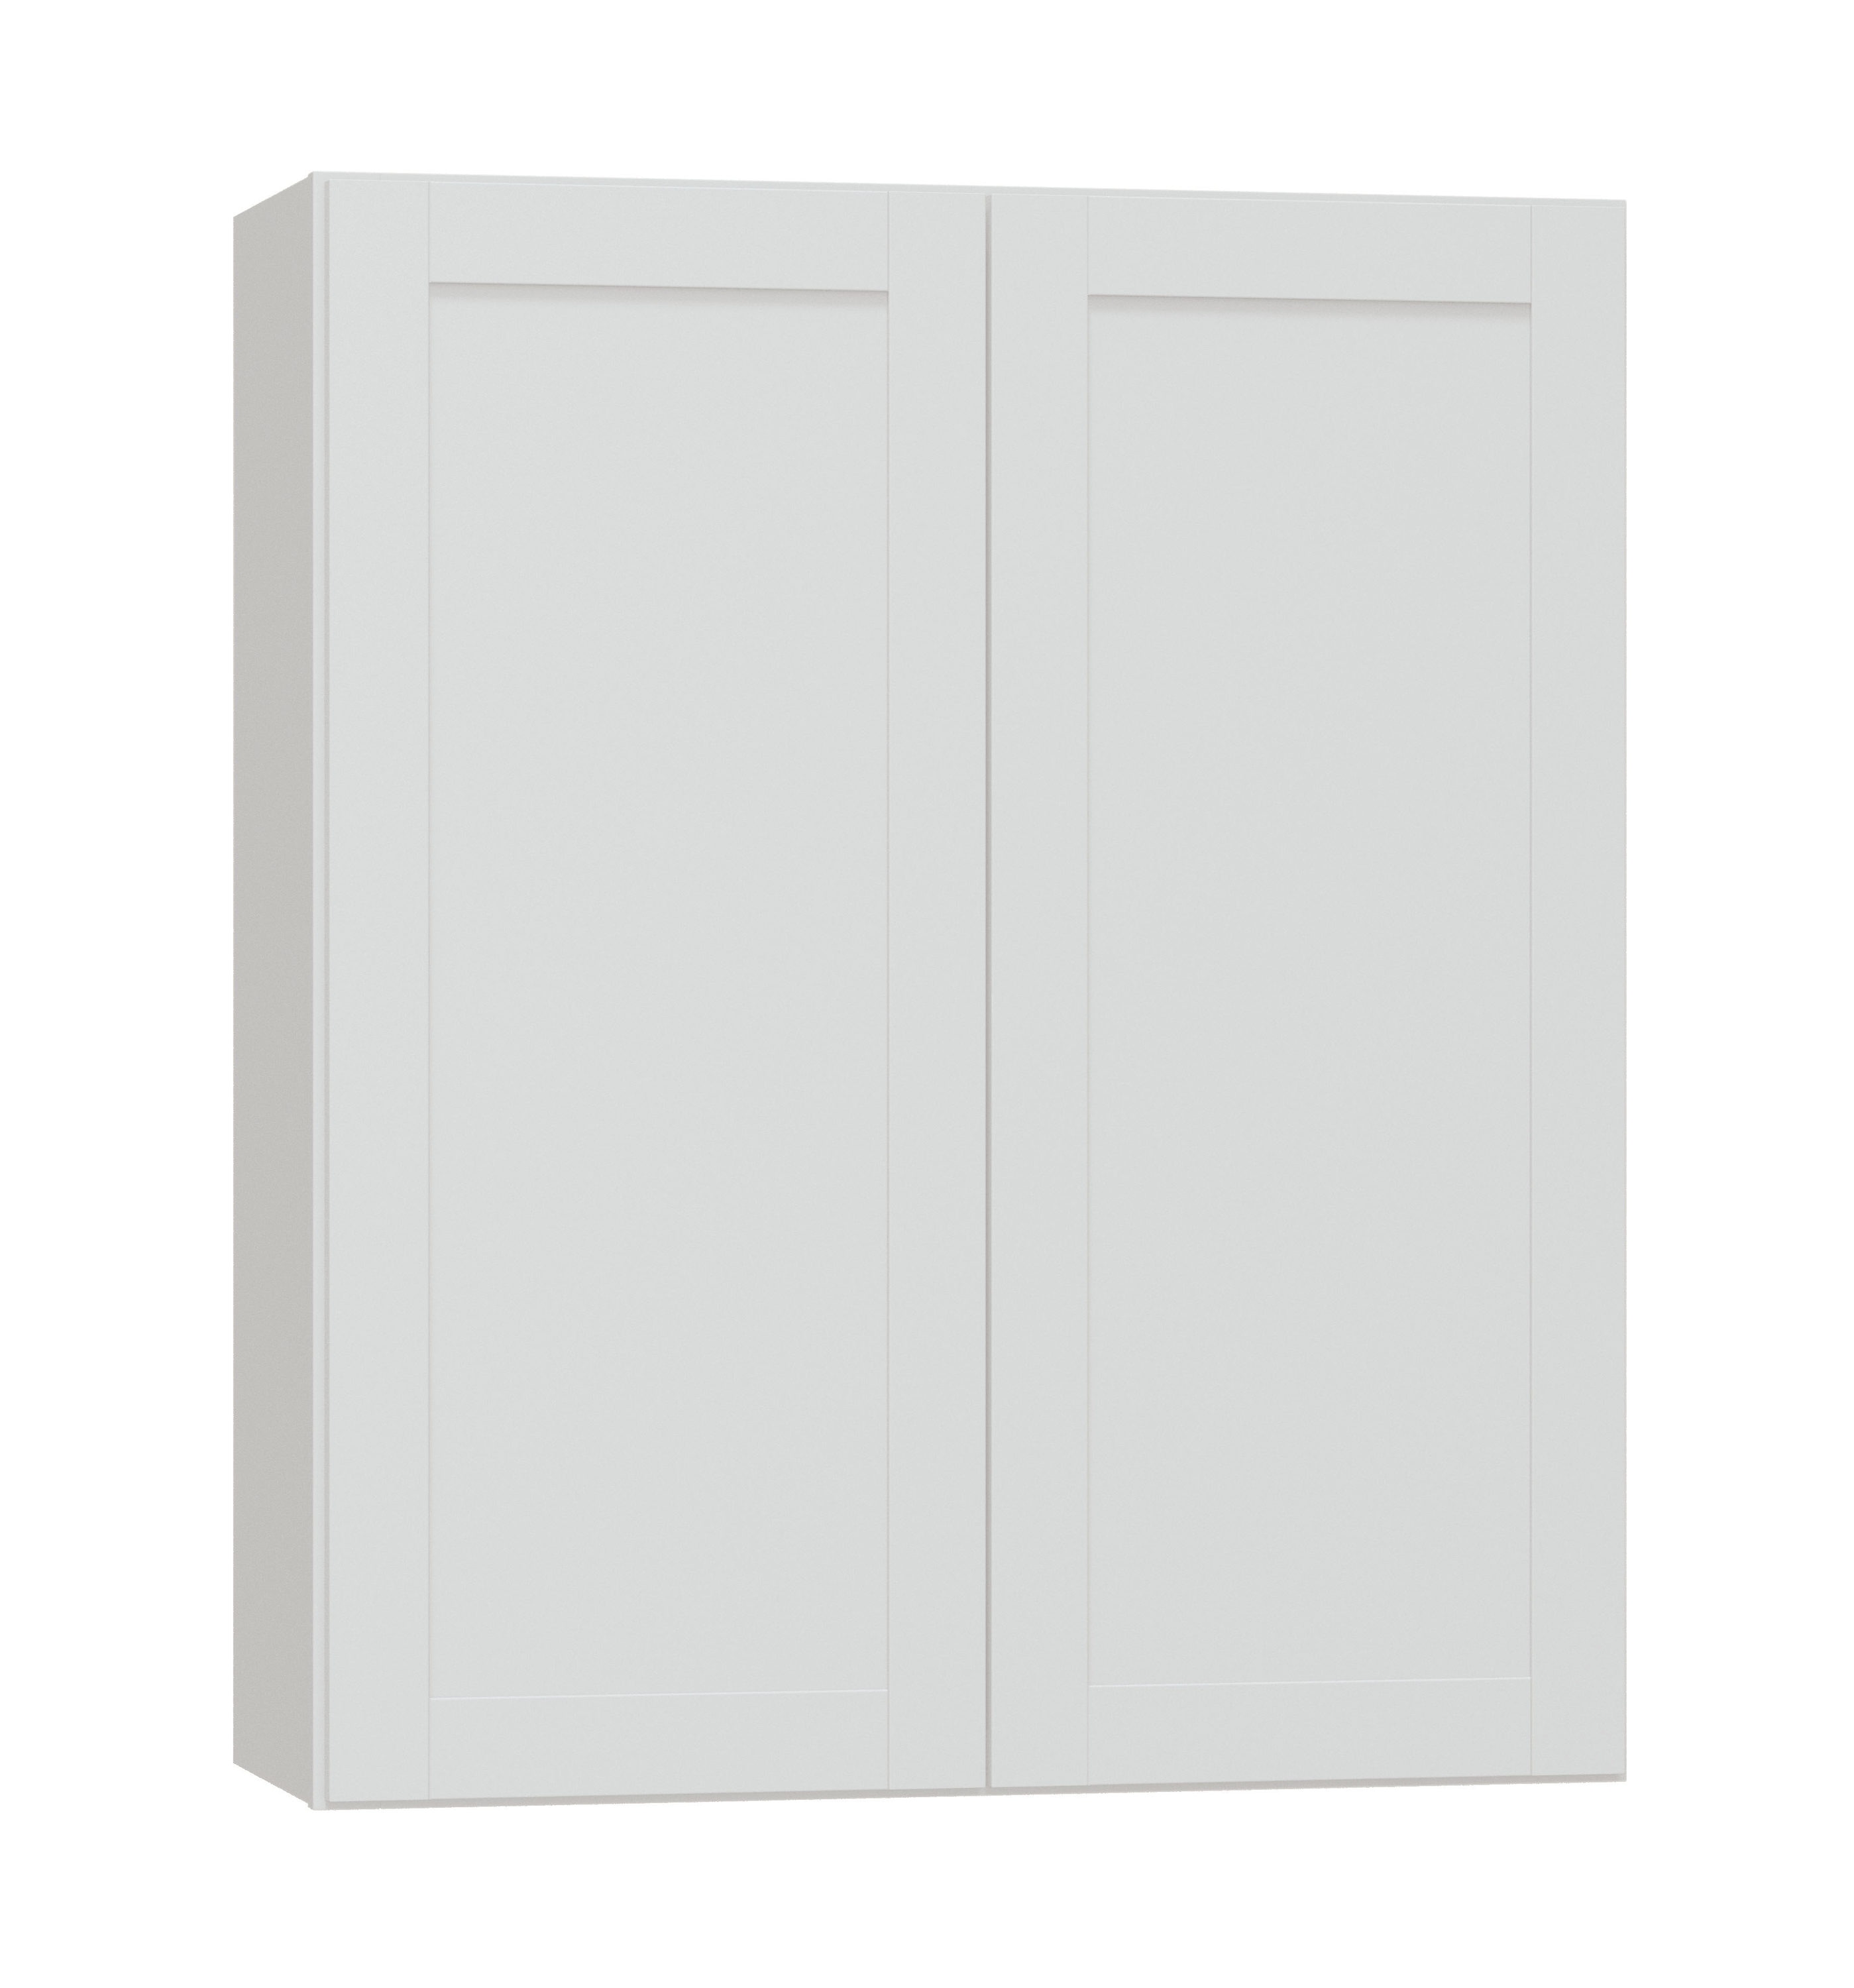 Arcadia 30-in W x 36-in H x 12-in D White Door Wall Fully Assembled Cabinet (Recessed Panel Shaker Door Style) | - Diamond NOW G10 W3036B